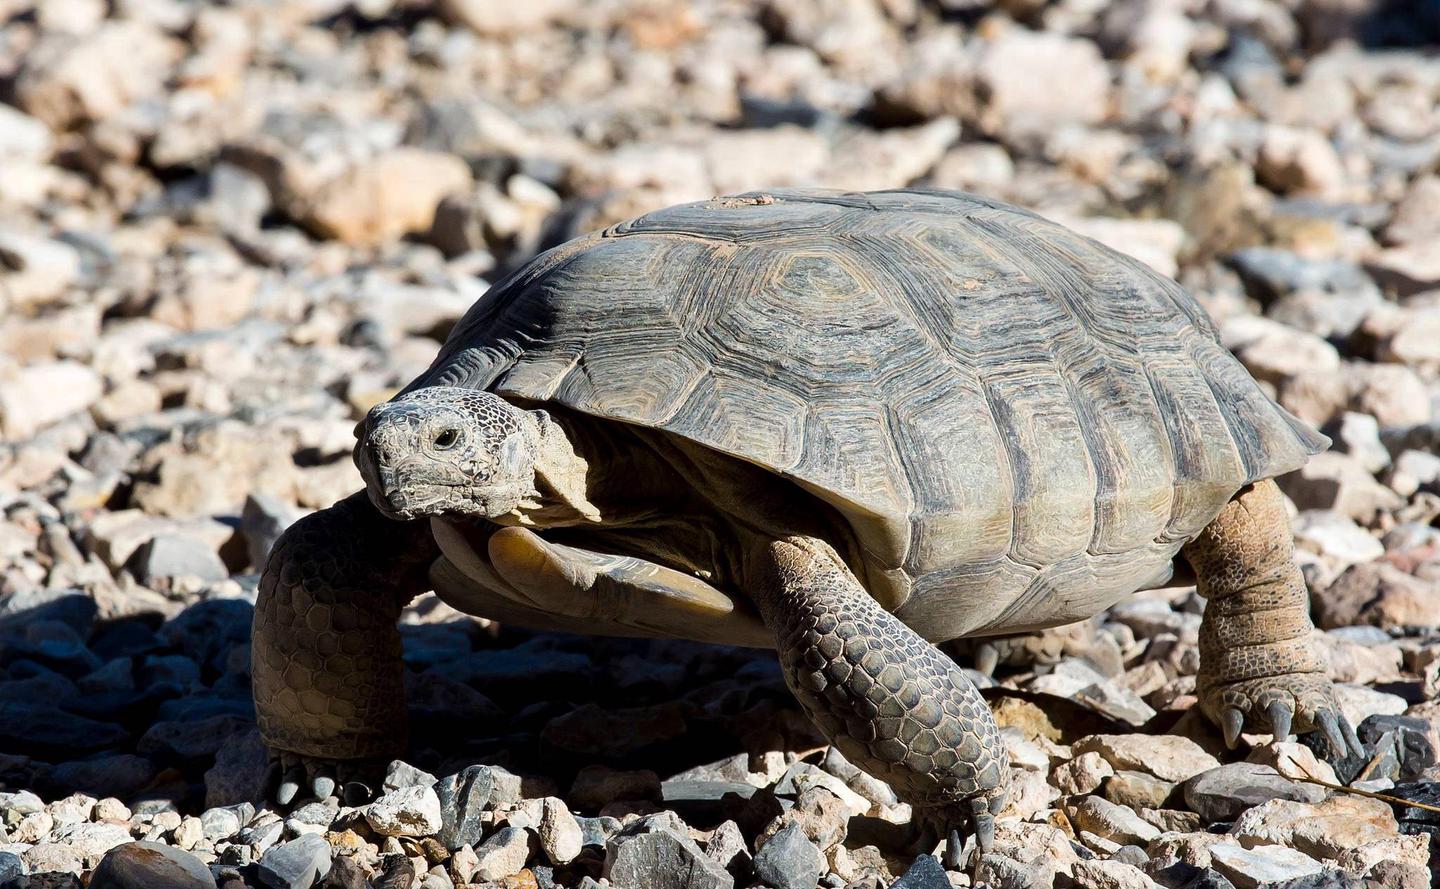 A close-up picture of a desert tortoise.Red Rock Canyon's resident desert tortoise.